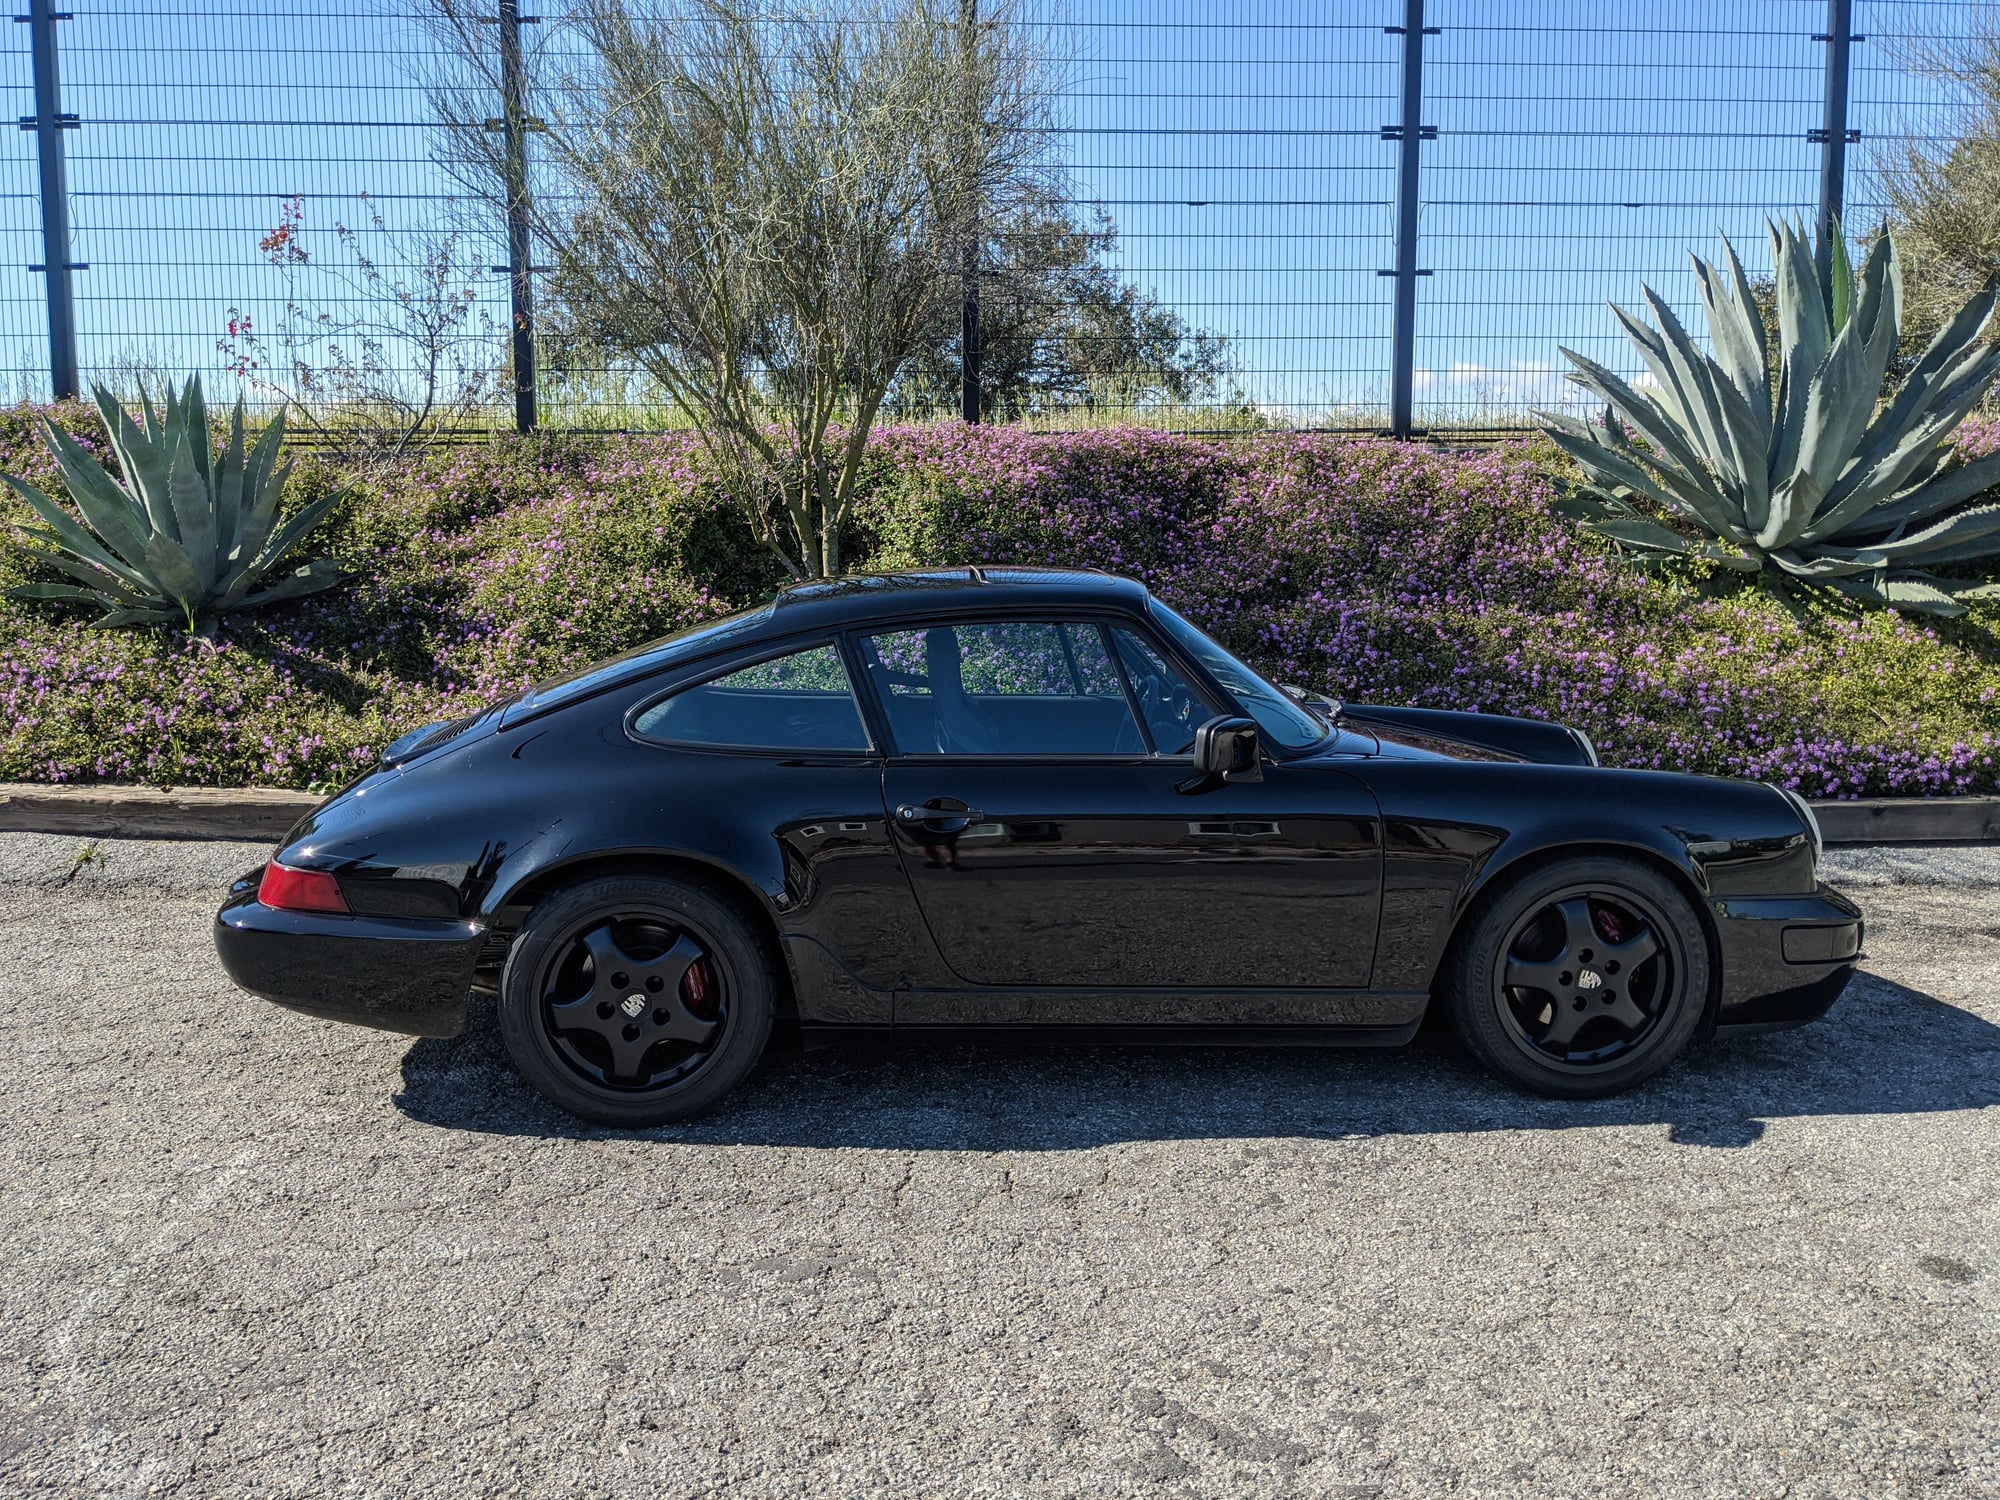 1990 Porsche 911 - Porsche 911 1990 Carrera 4 Black Manual Coupe - Used - VIN WP0AB2961LS452016 - 150,691 Miles - 6 cyl - AWD - Manual - Coupe - Black - Los Angeles, CA 90068, United States